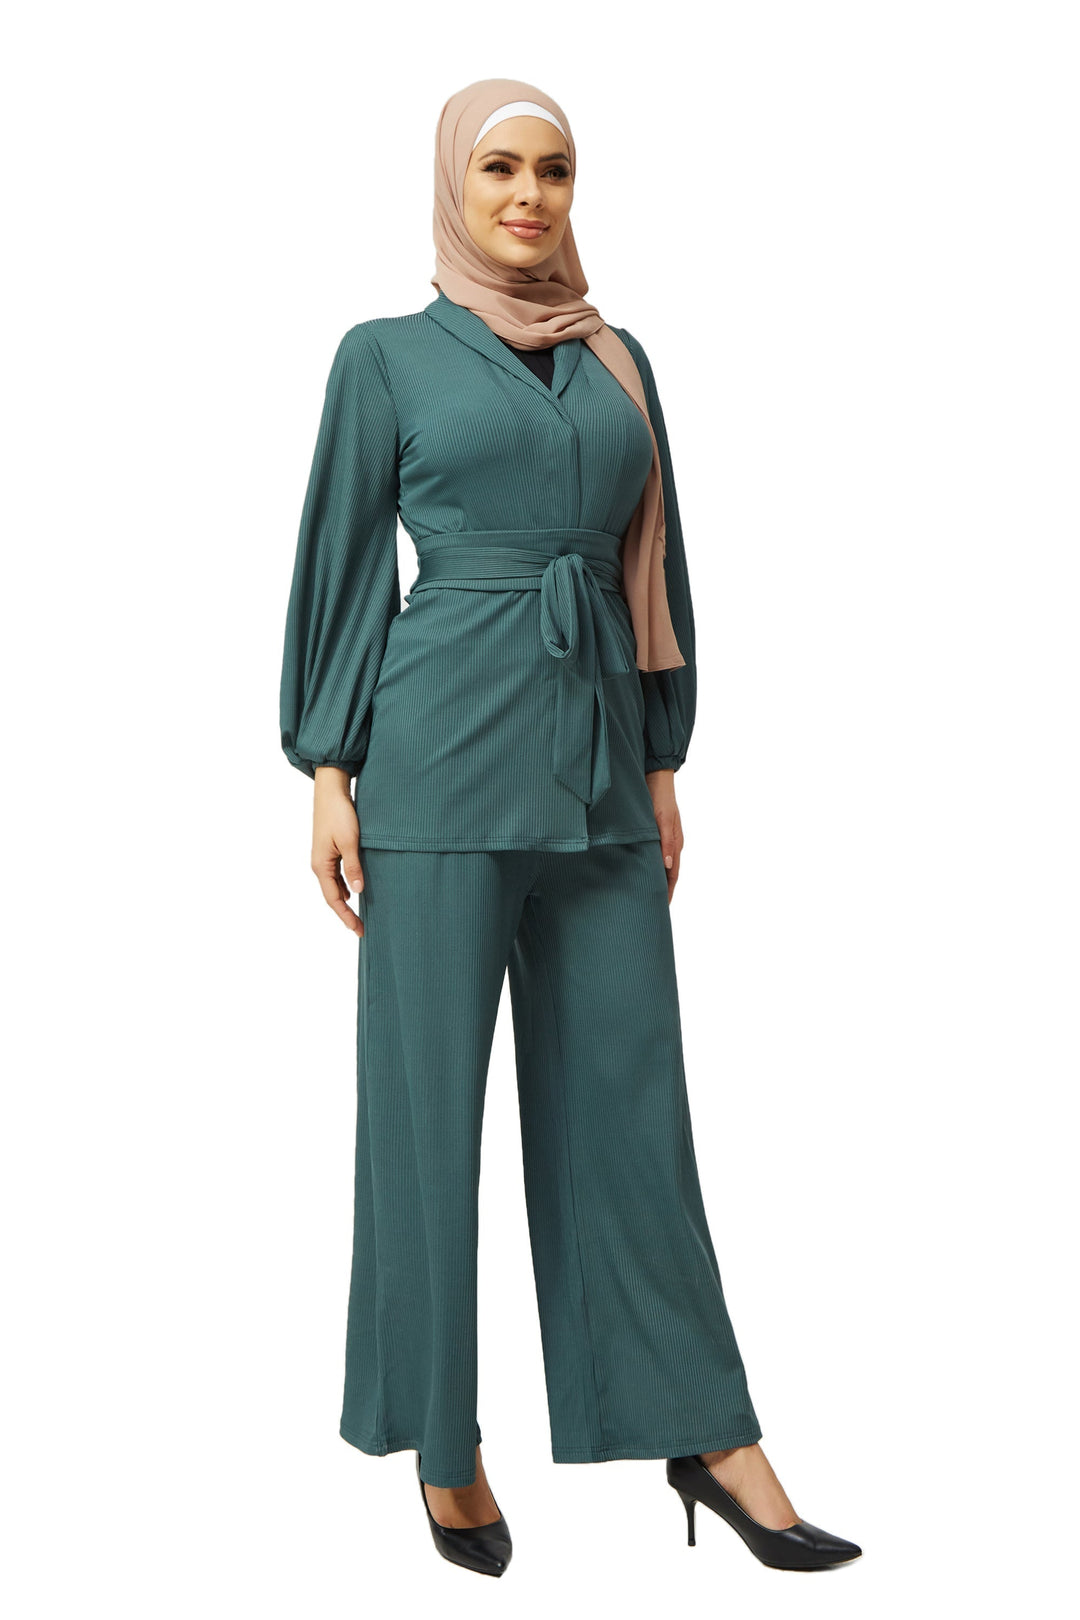 Urban Modesty - Teal Belted Ribbed Tunic & Pants Set